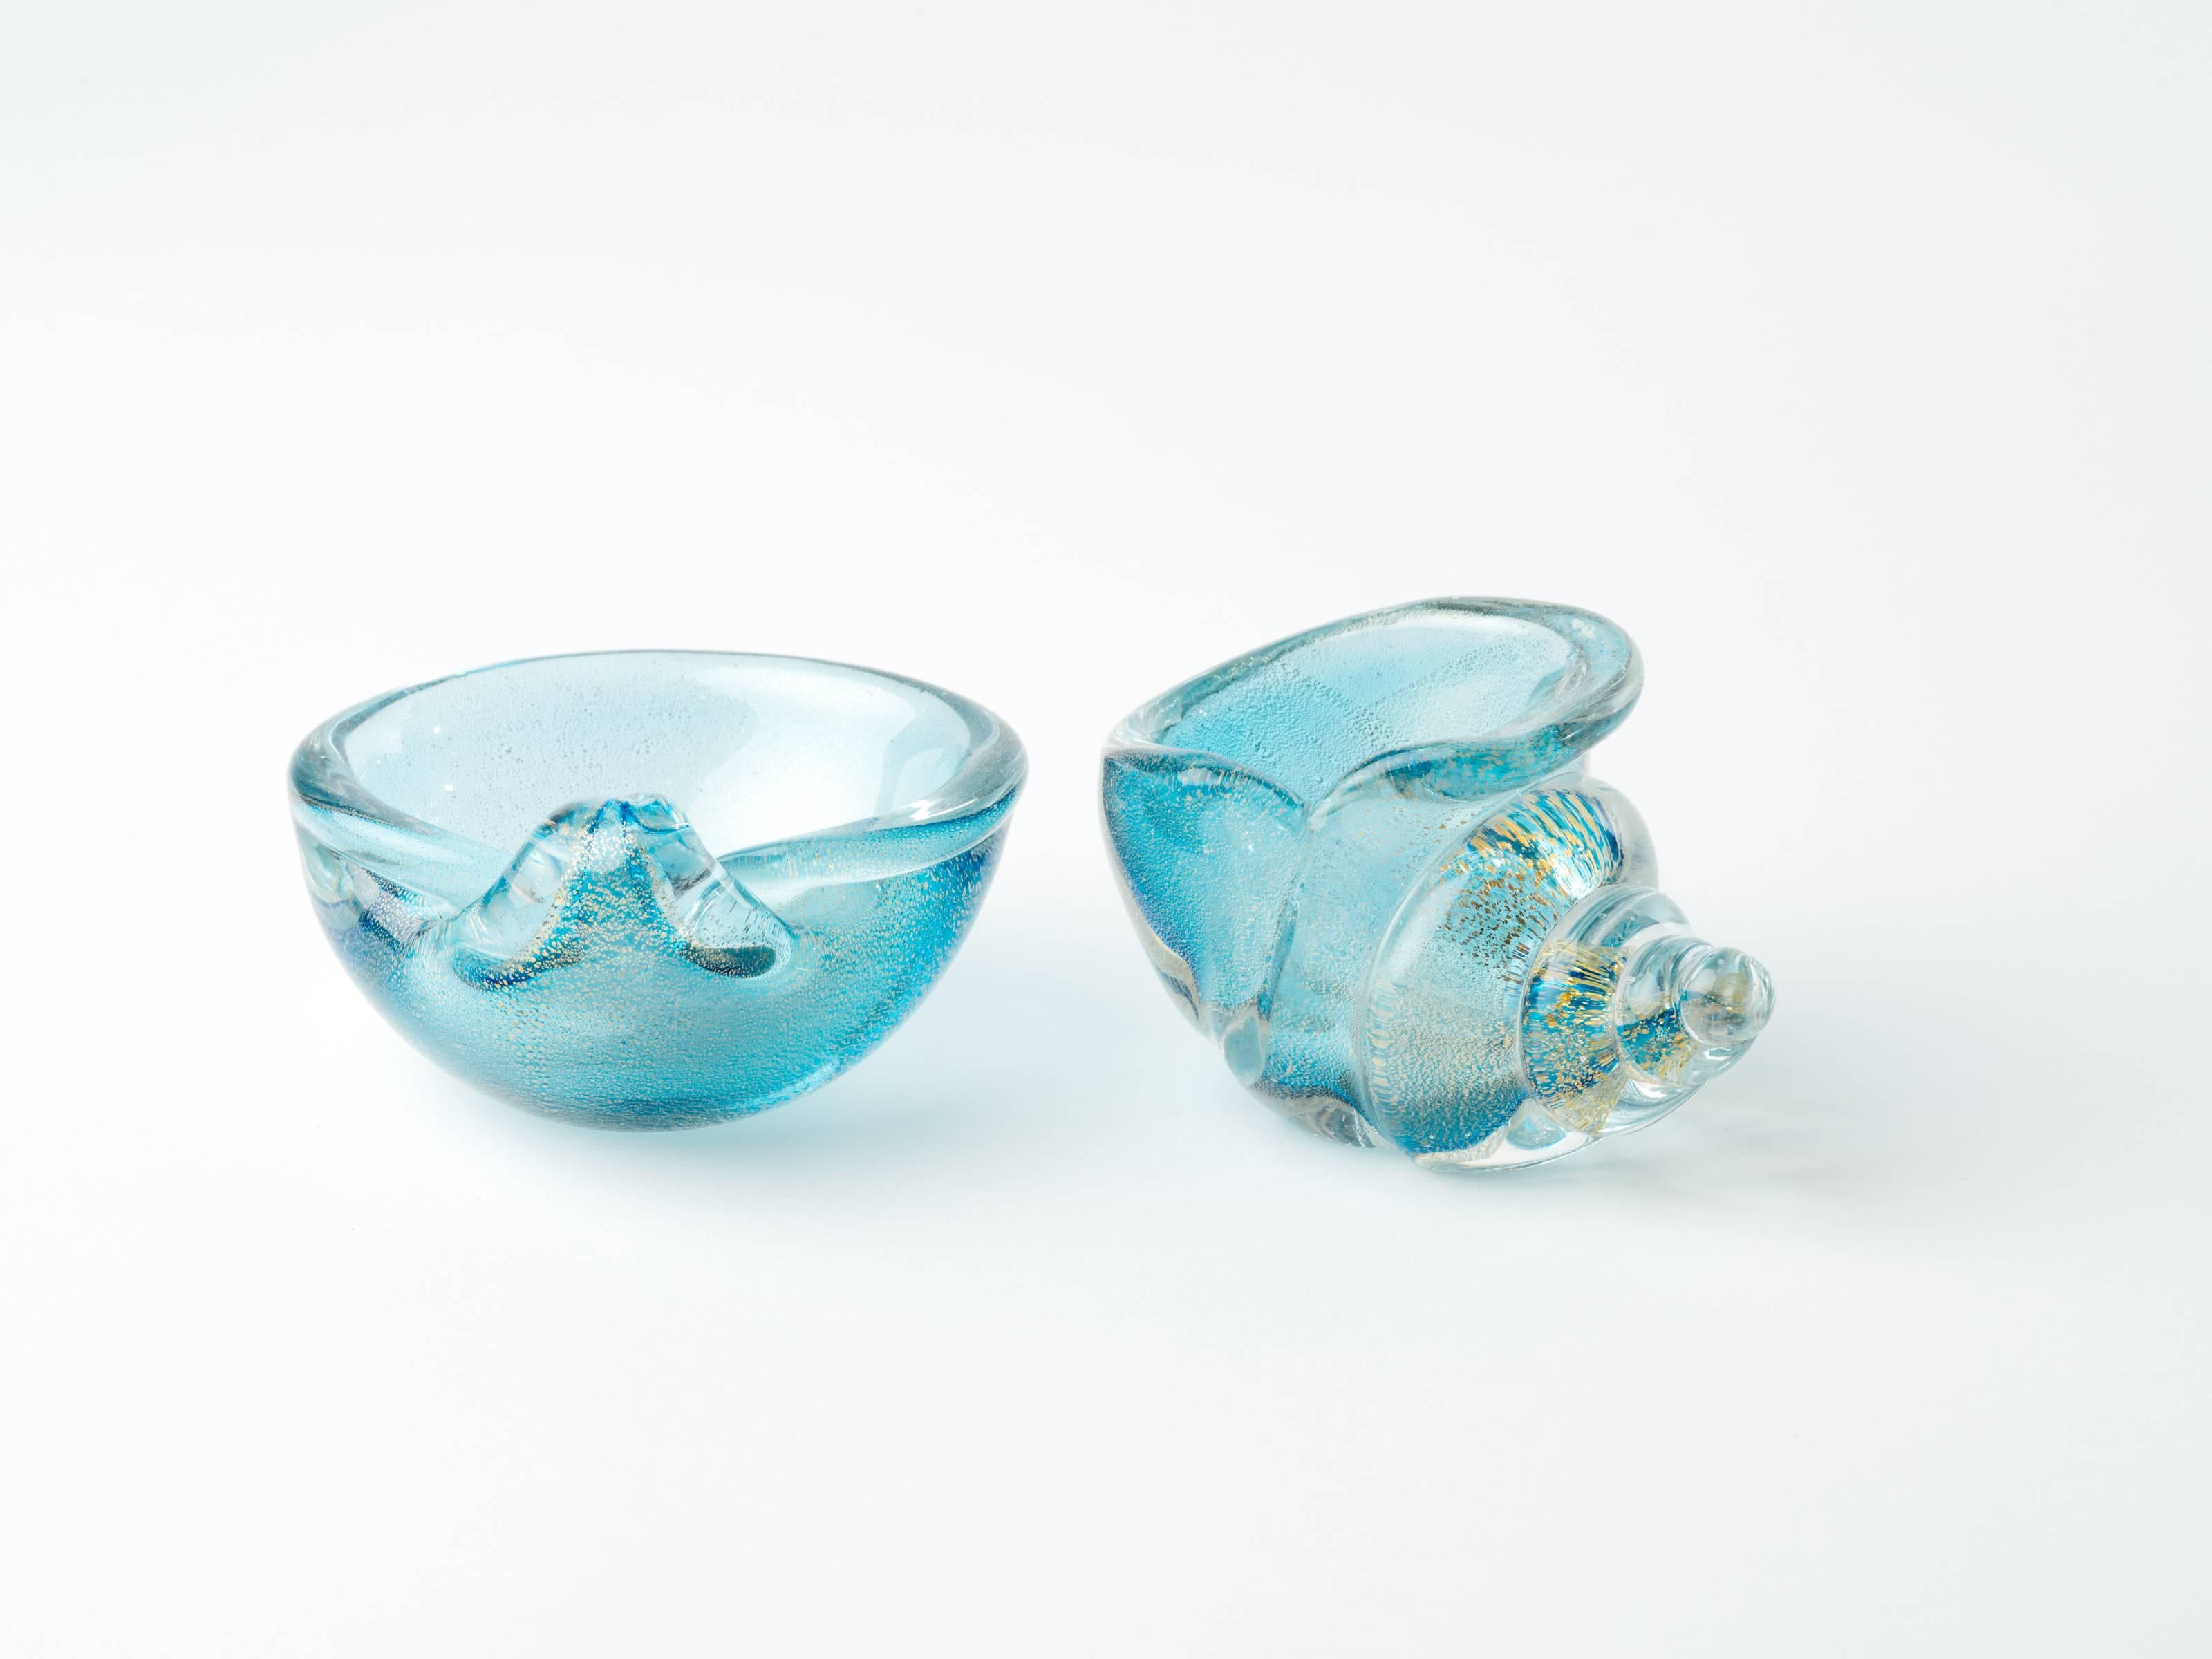 Pair of Mid-Century Modern Murano glass bowls in hues of aqua with 24-karat gold leaf flecks. Bowls have elegant shell forms with scrolled rims. Decorative or can be used a salt cellars.